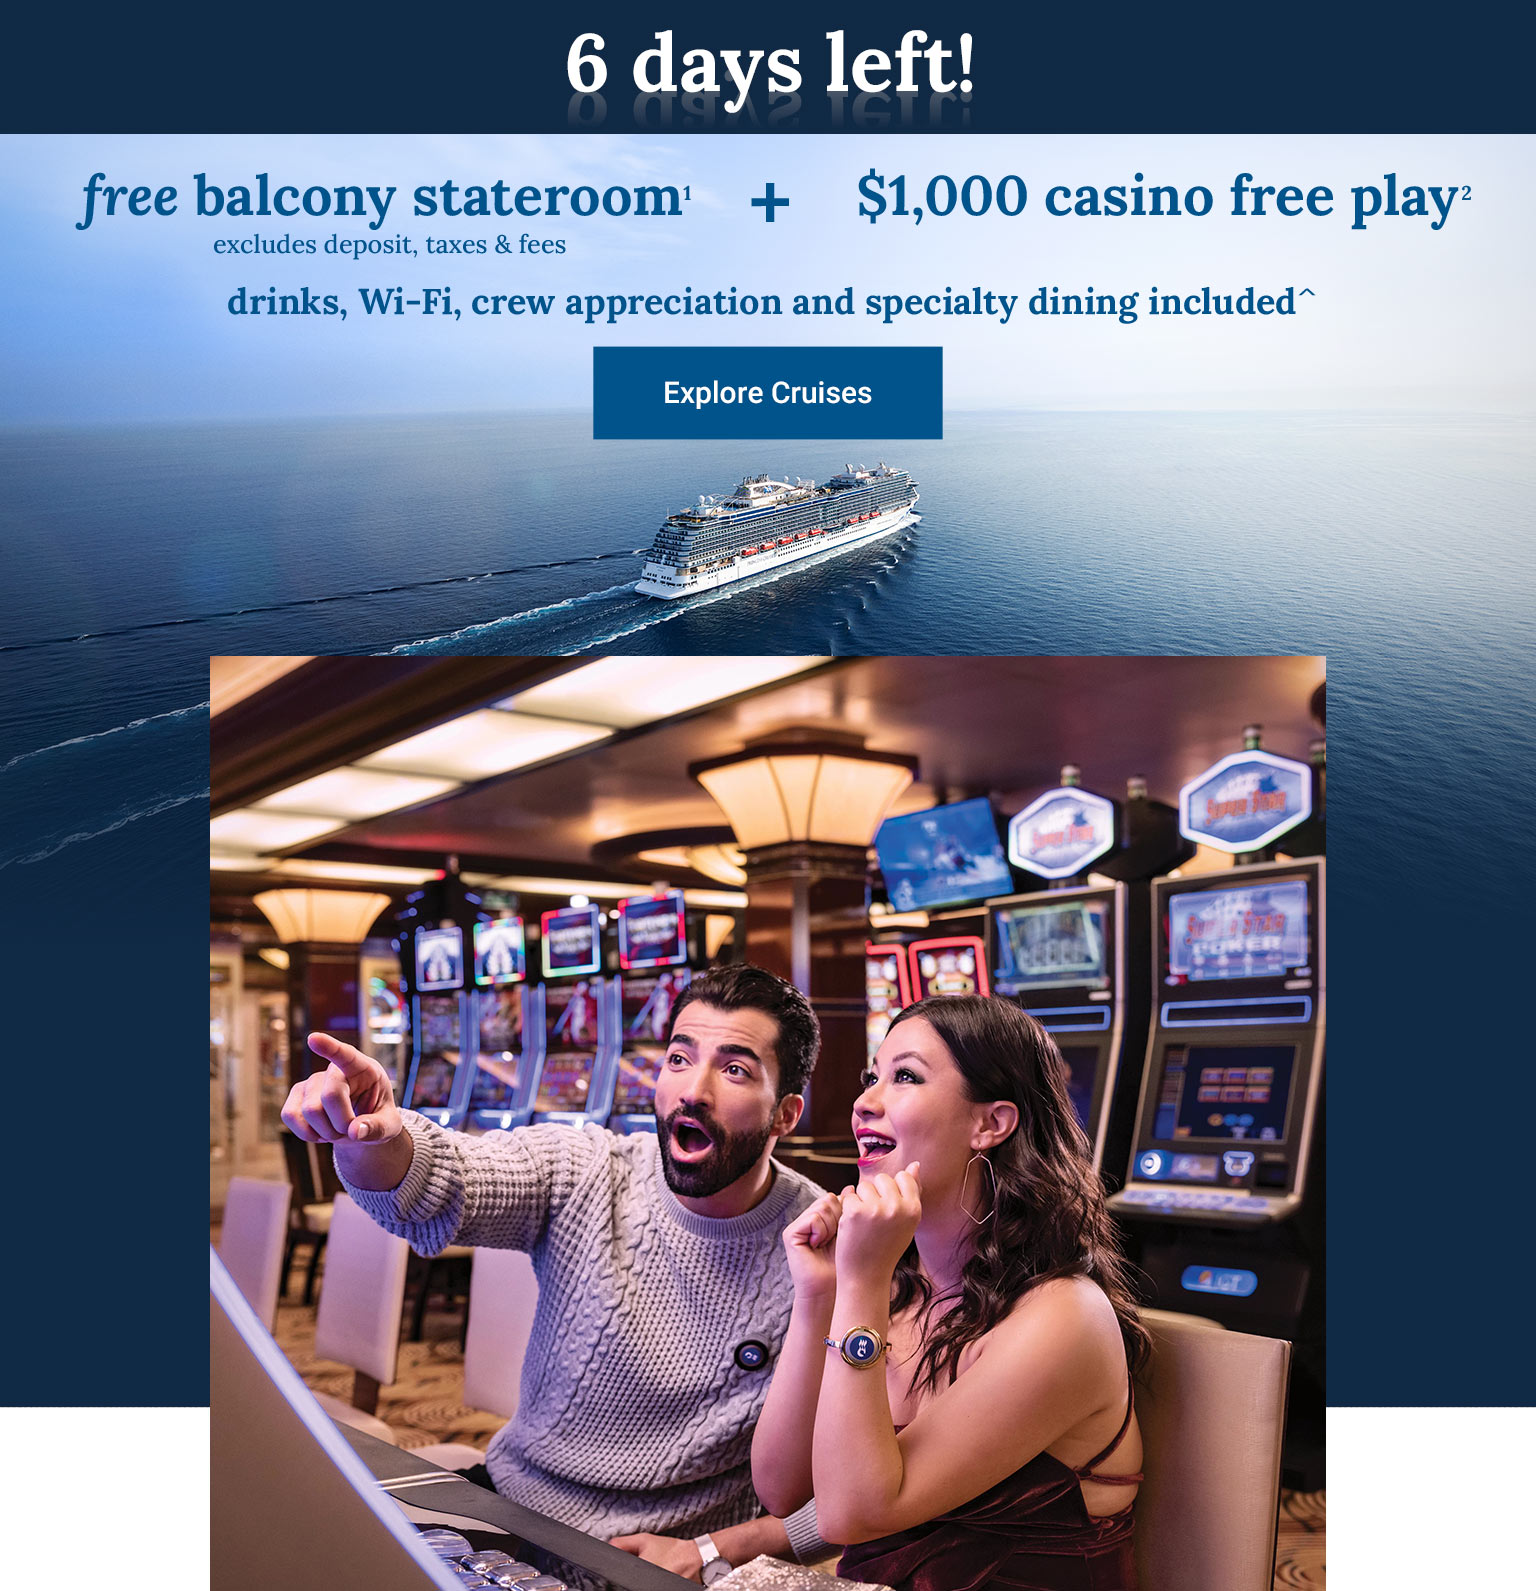 free balcony stateroom + $1,000 casino free play + drinks, Wi-Fi, crew appreciation and specialty dining included. Click here to book.